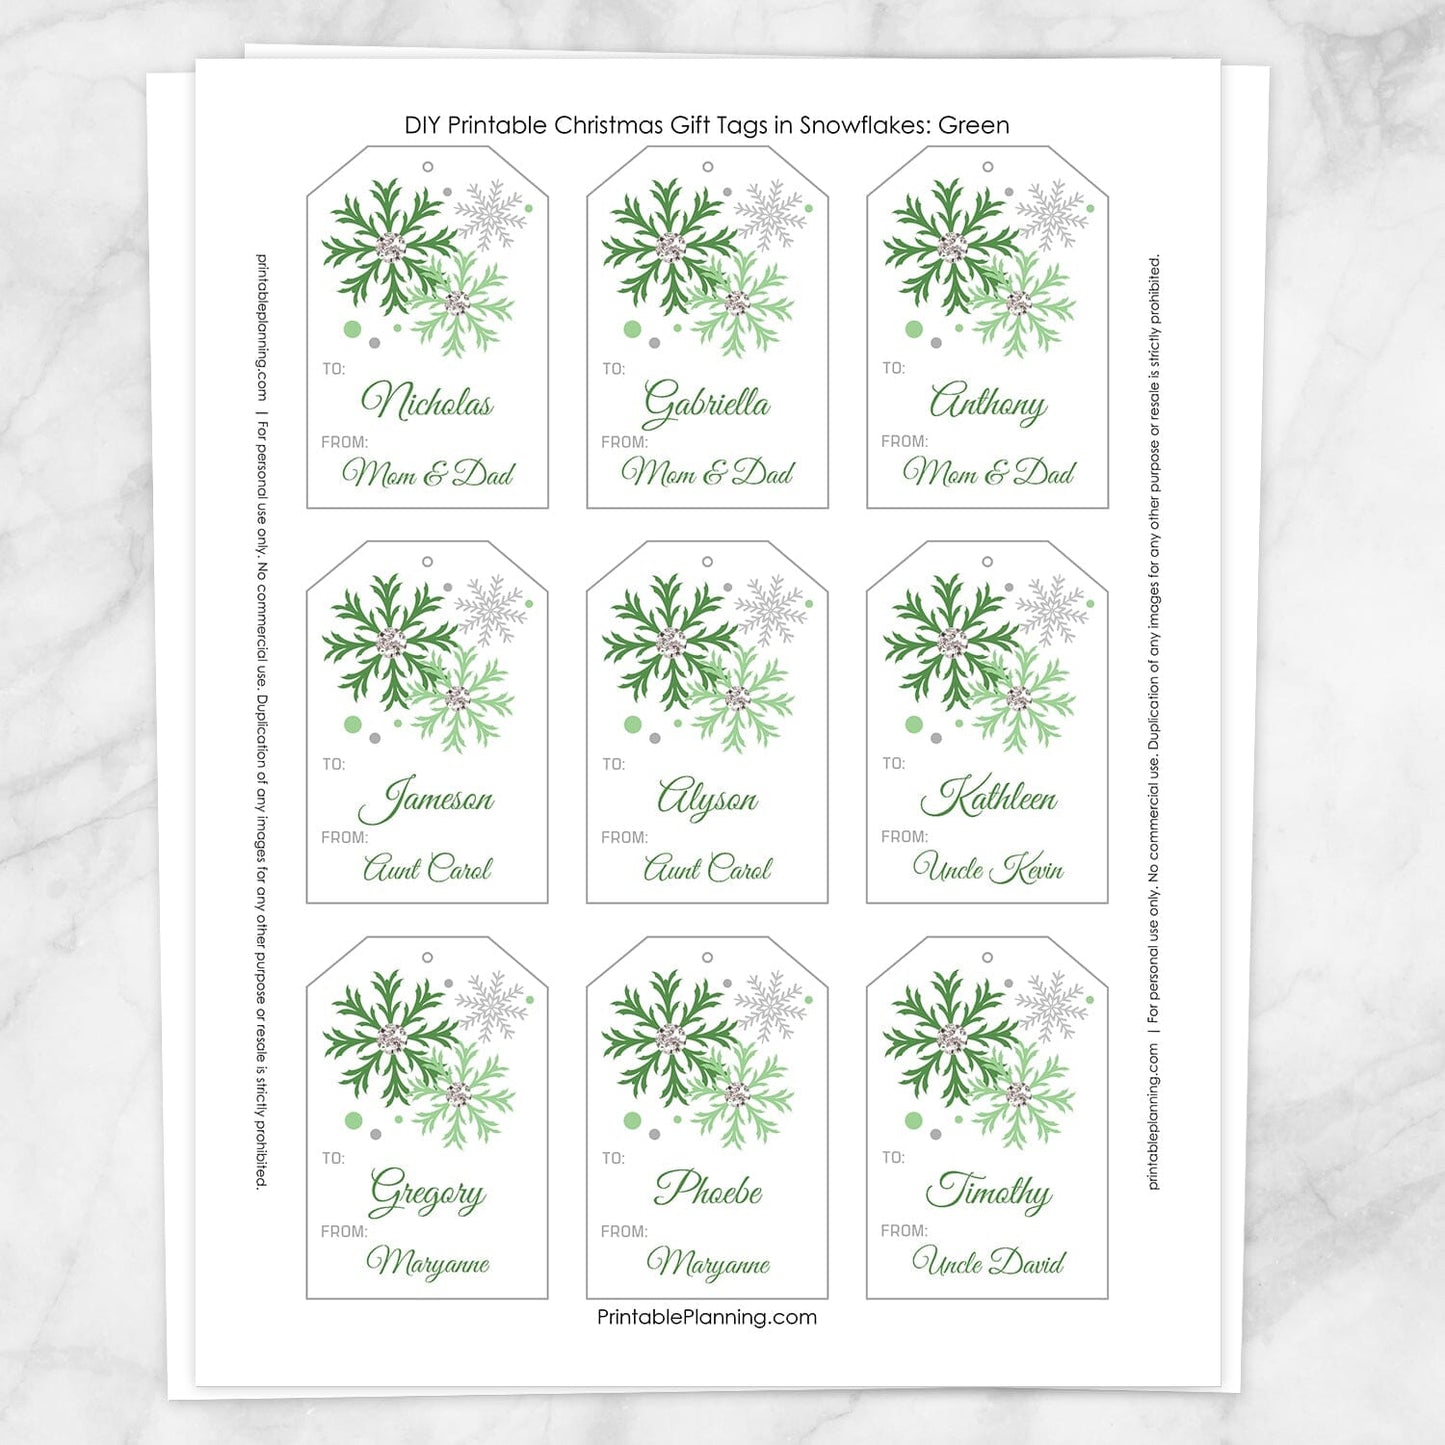 Printable Snowflake Personalized Gift Tags in Green at Printable Planning